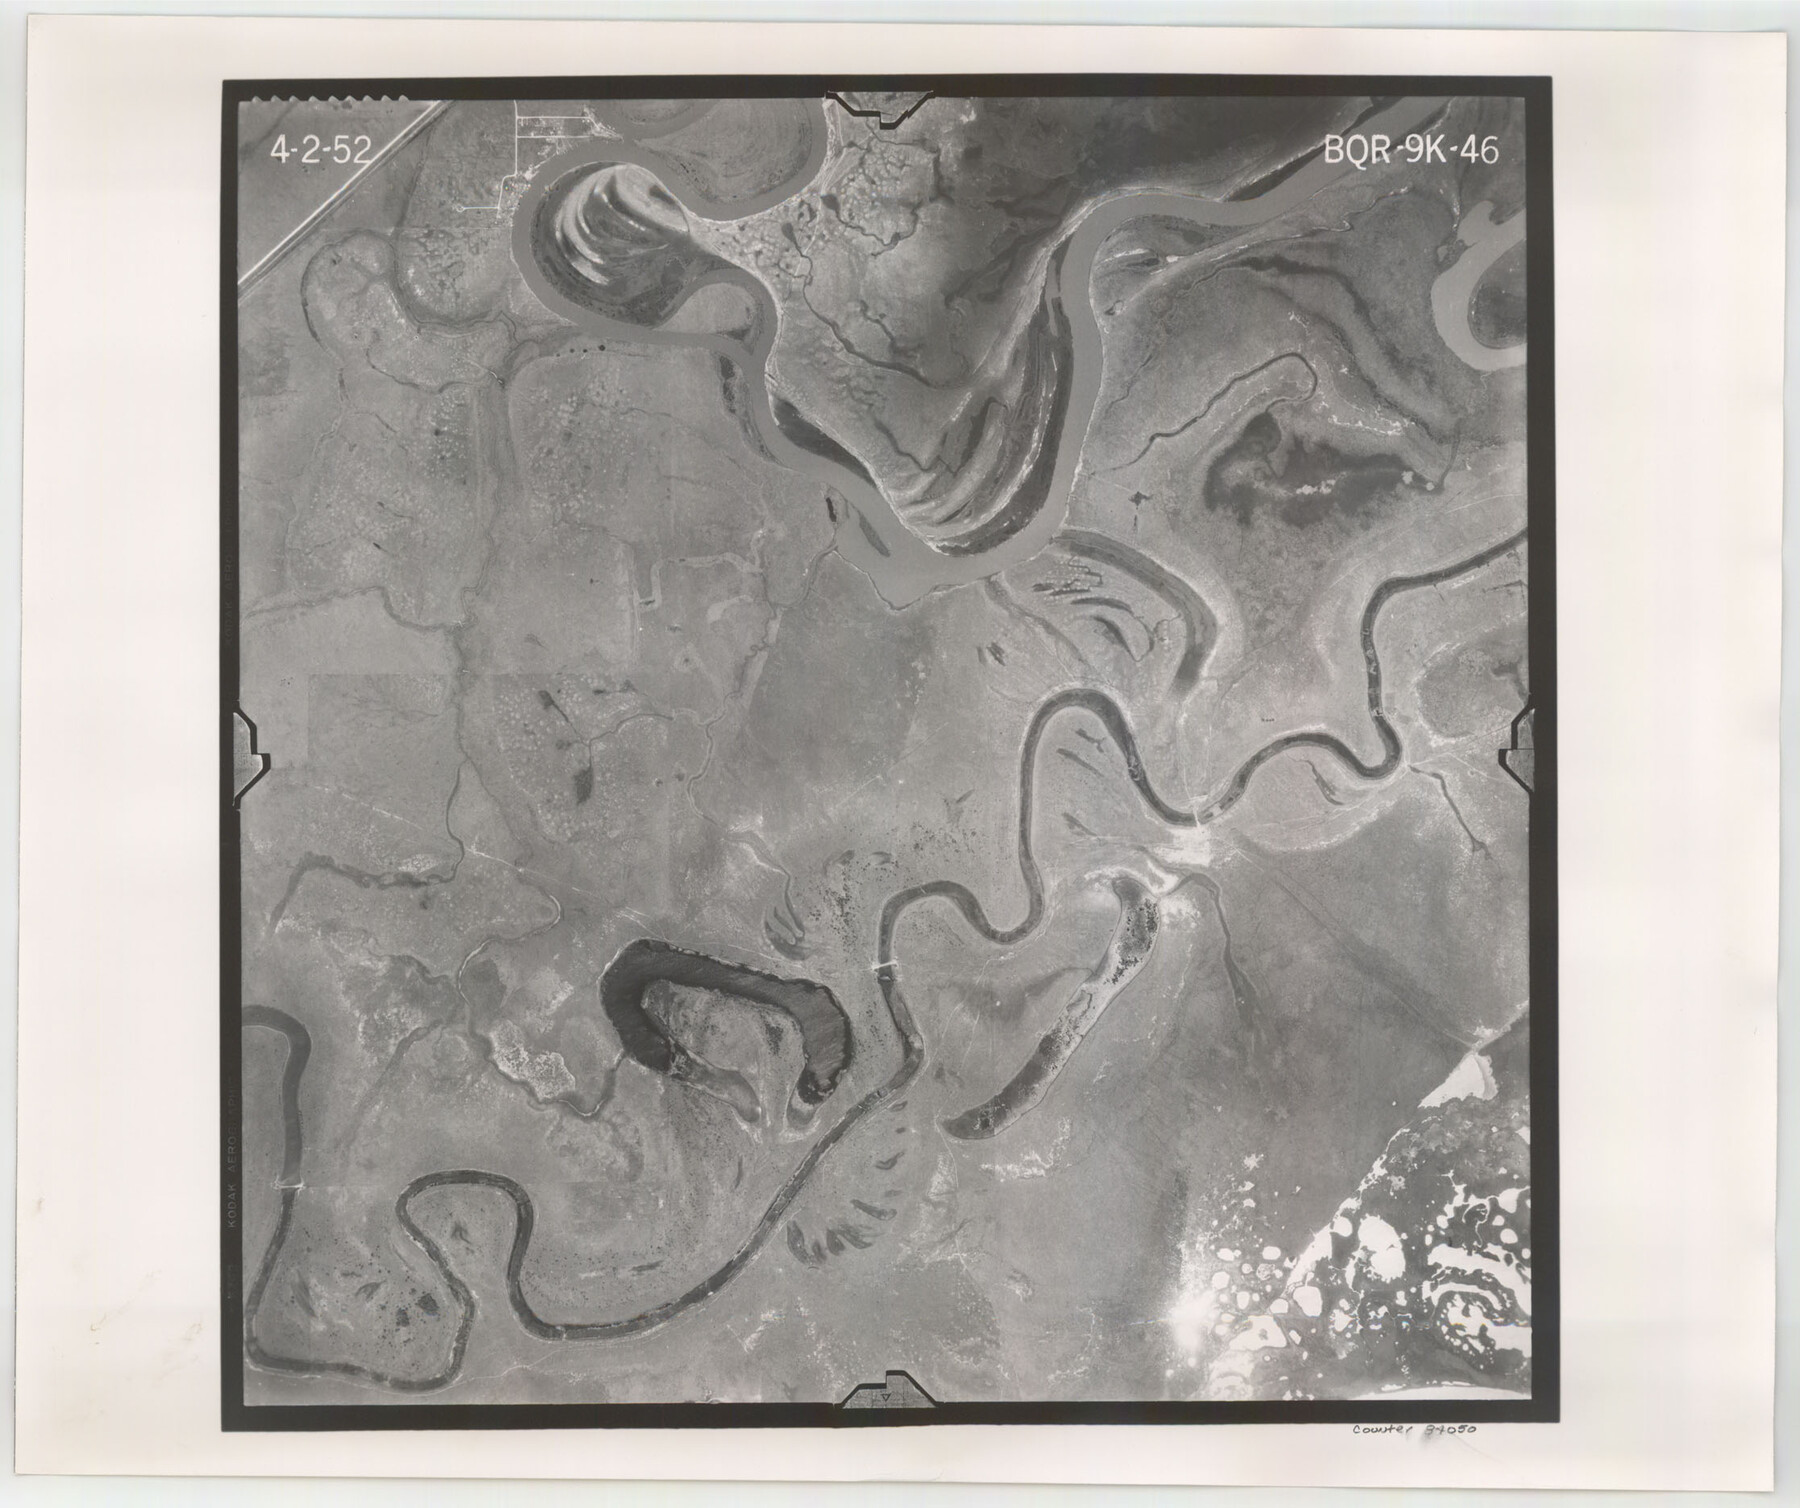 84050, Flight Mission No. BQR-9K, Frame 46, Brazoria County, General Map Collection